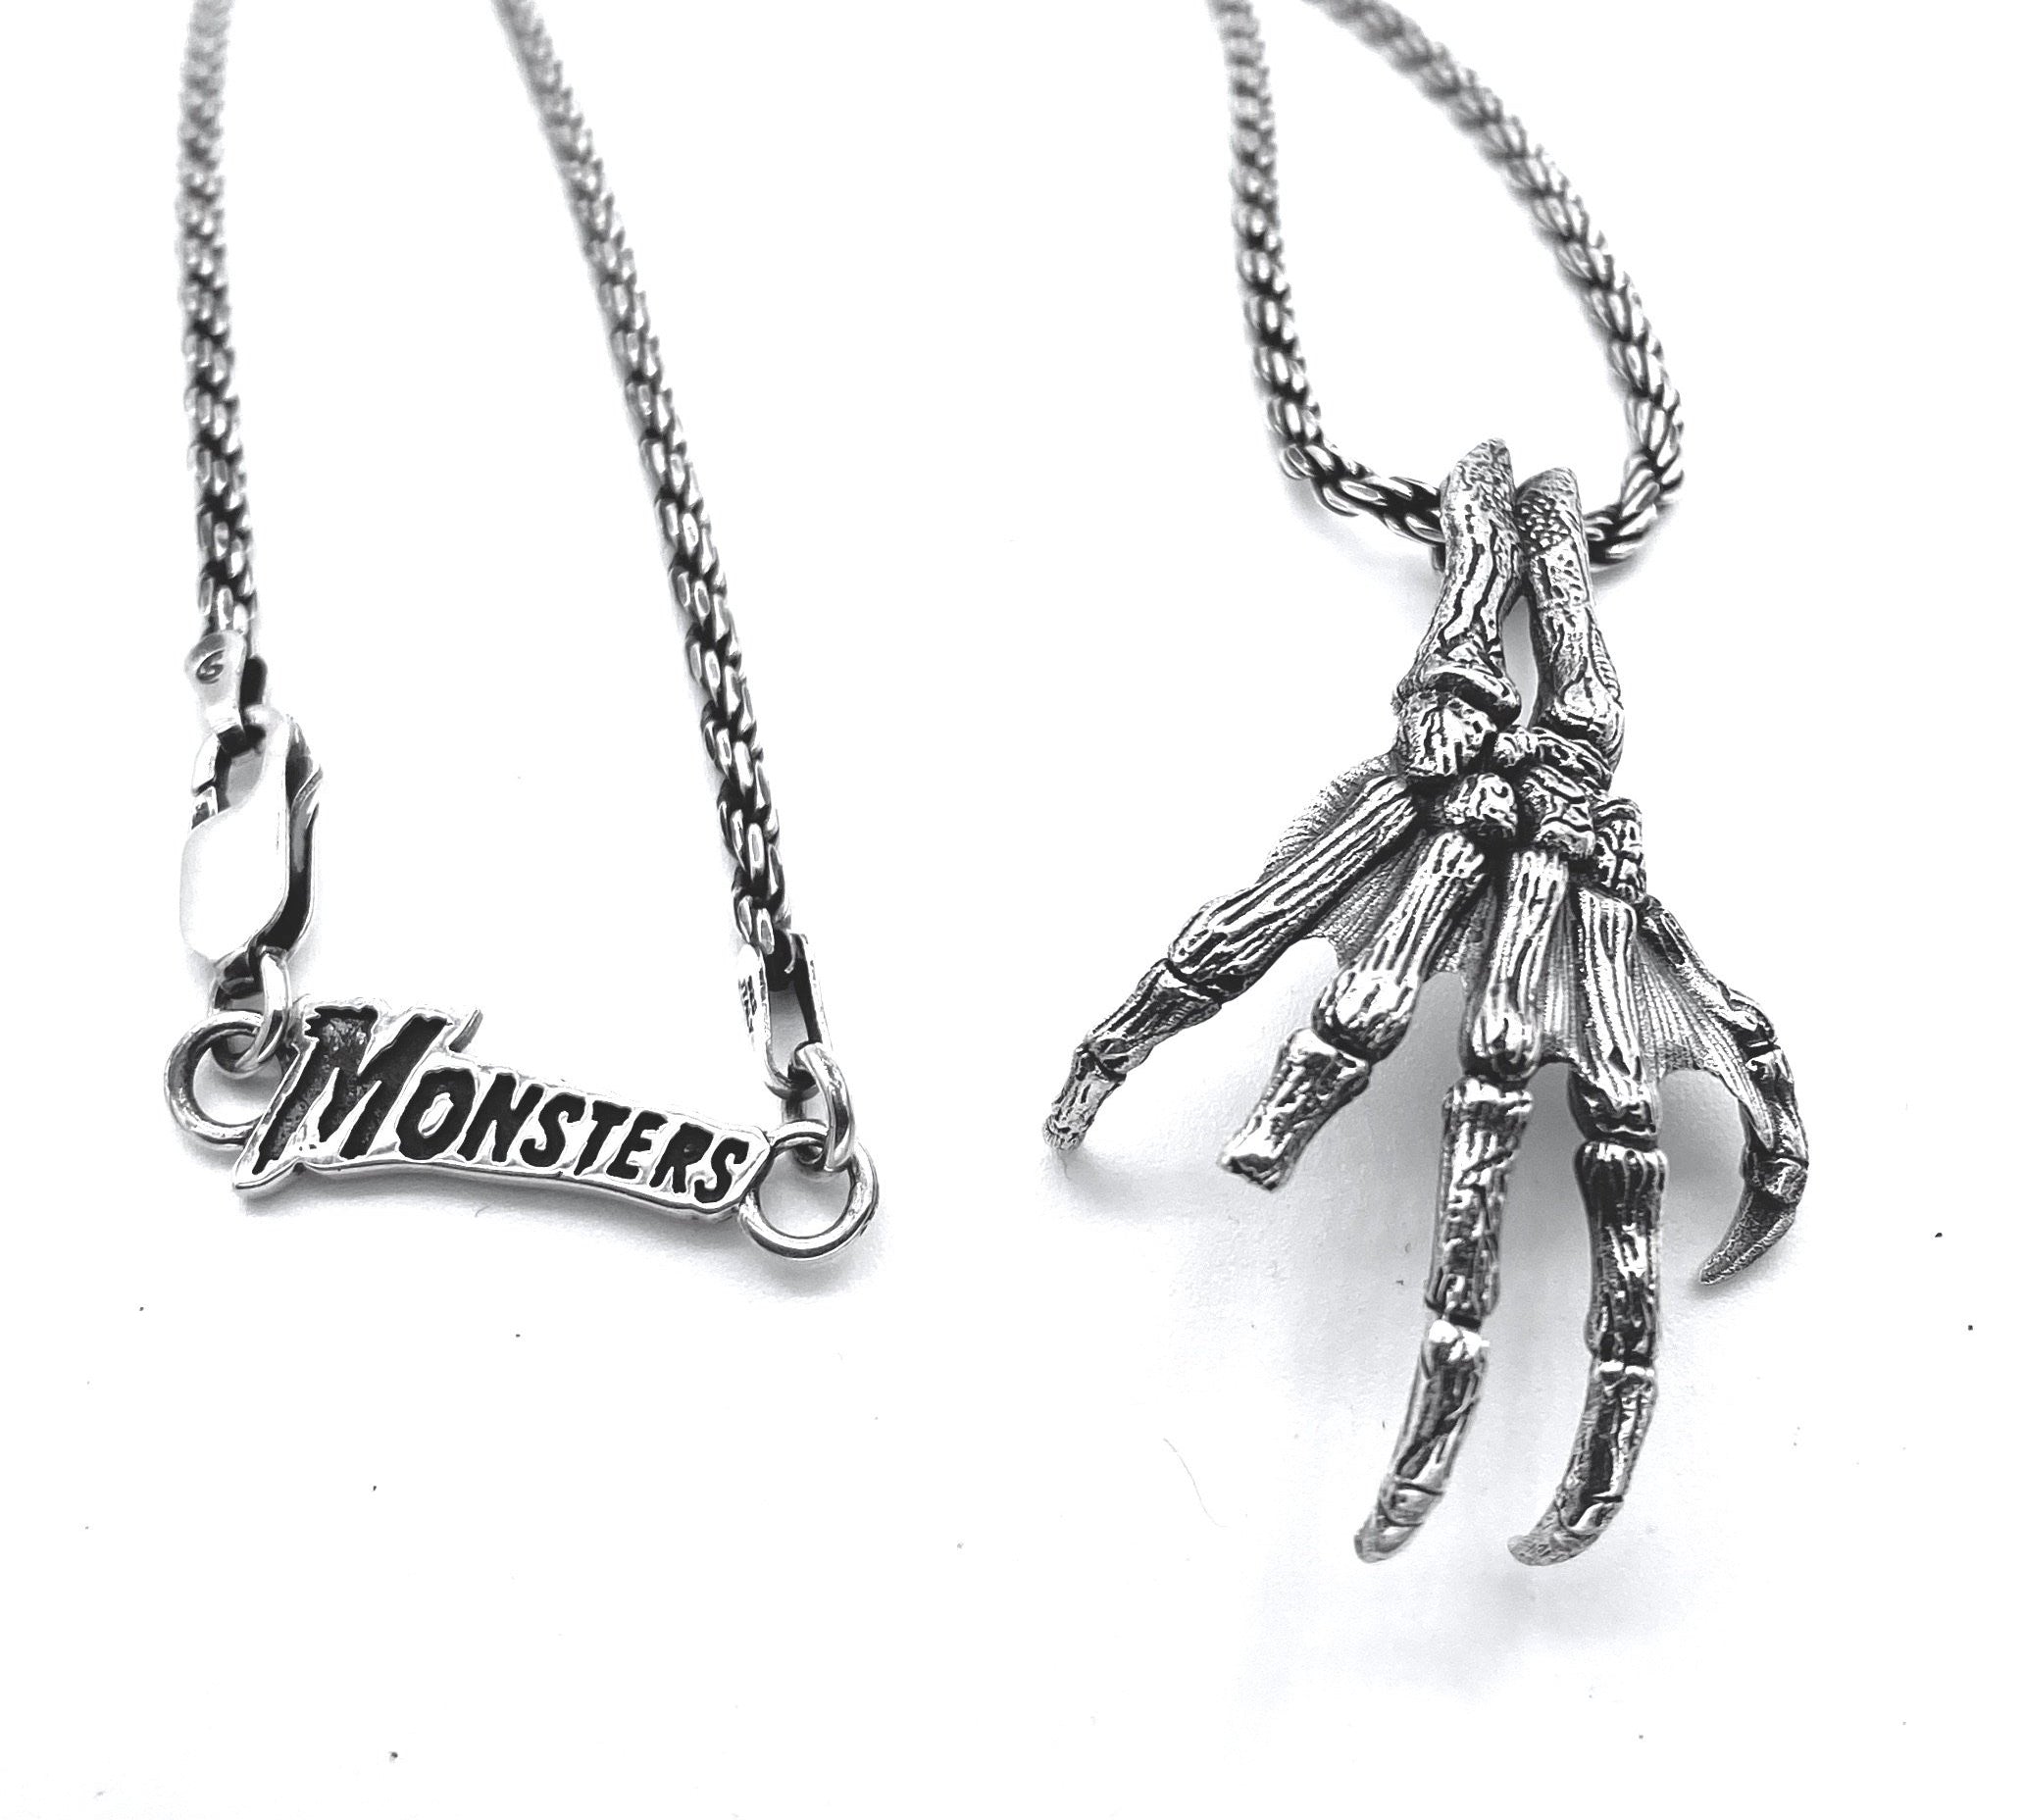 Creature Fossil Hand Necklace pm necklaces Precious Metals Sterling Silver .925 24" 